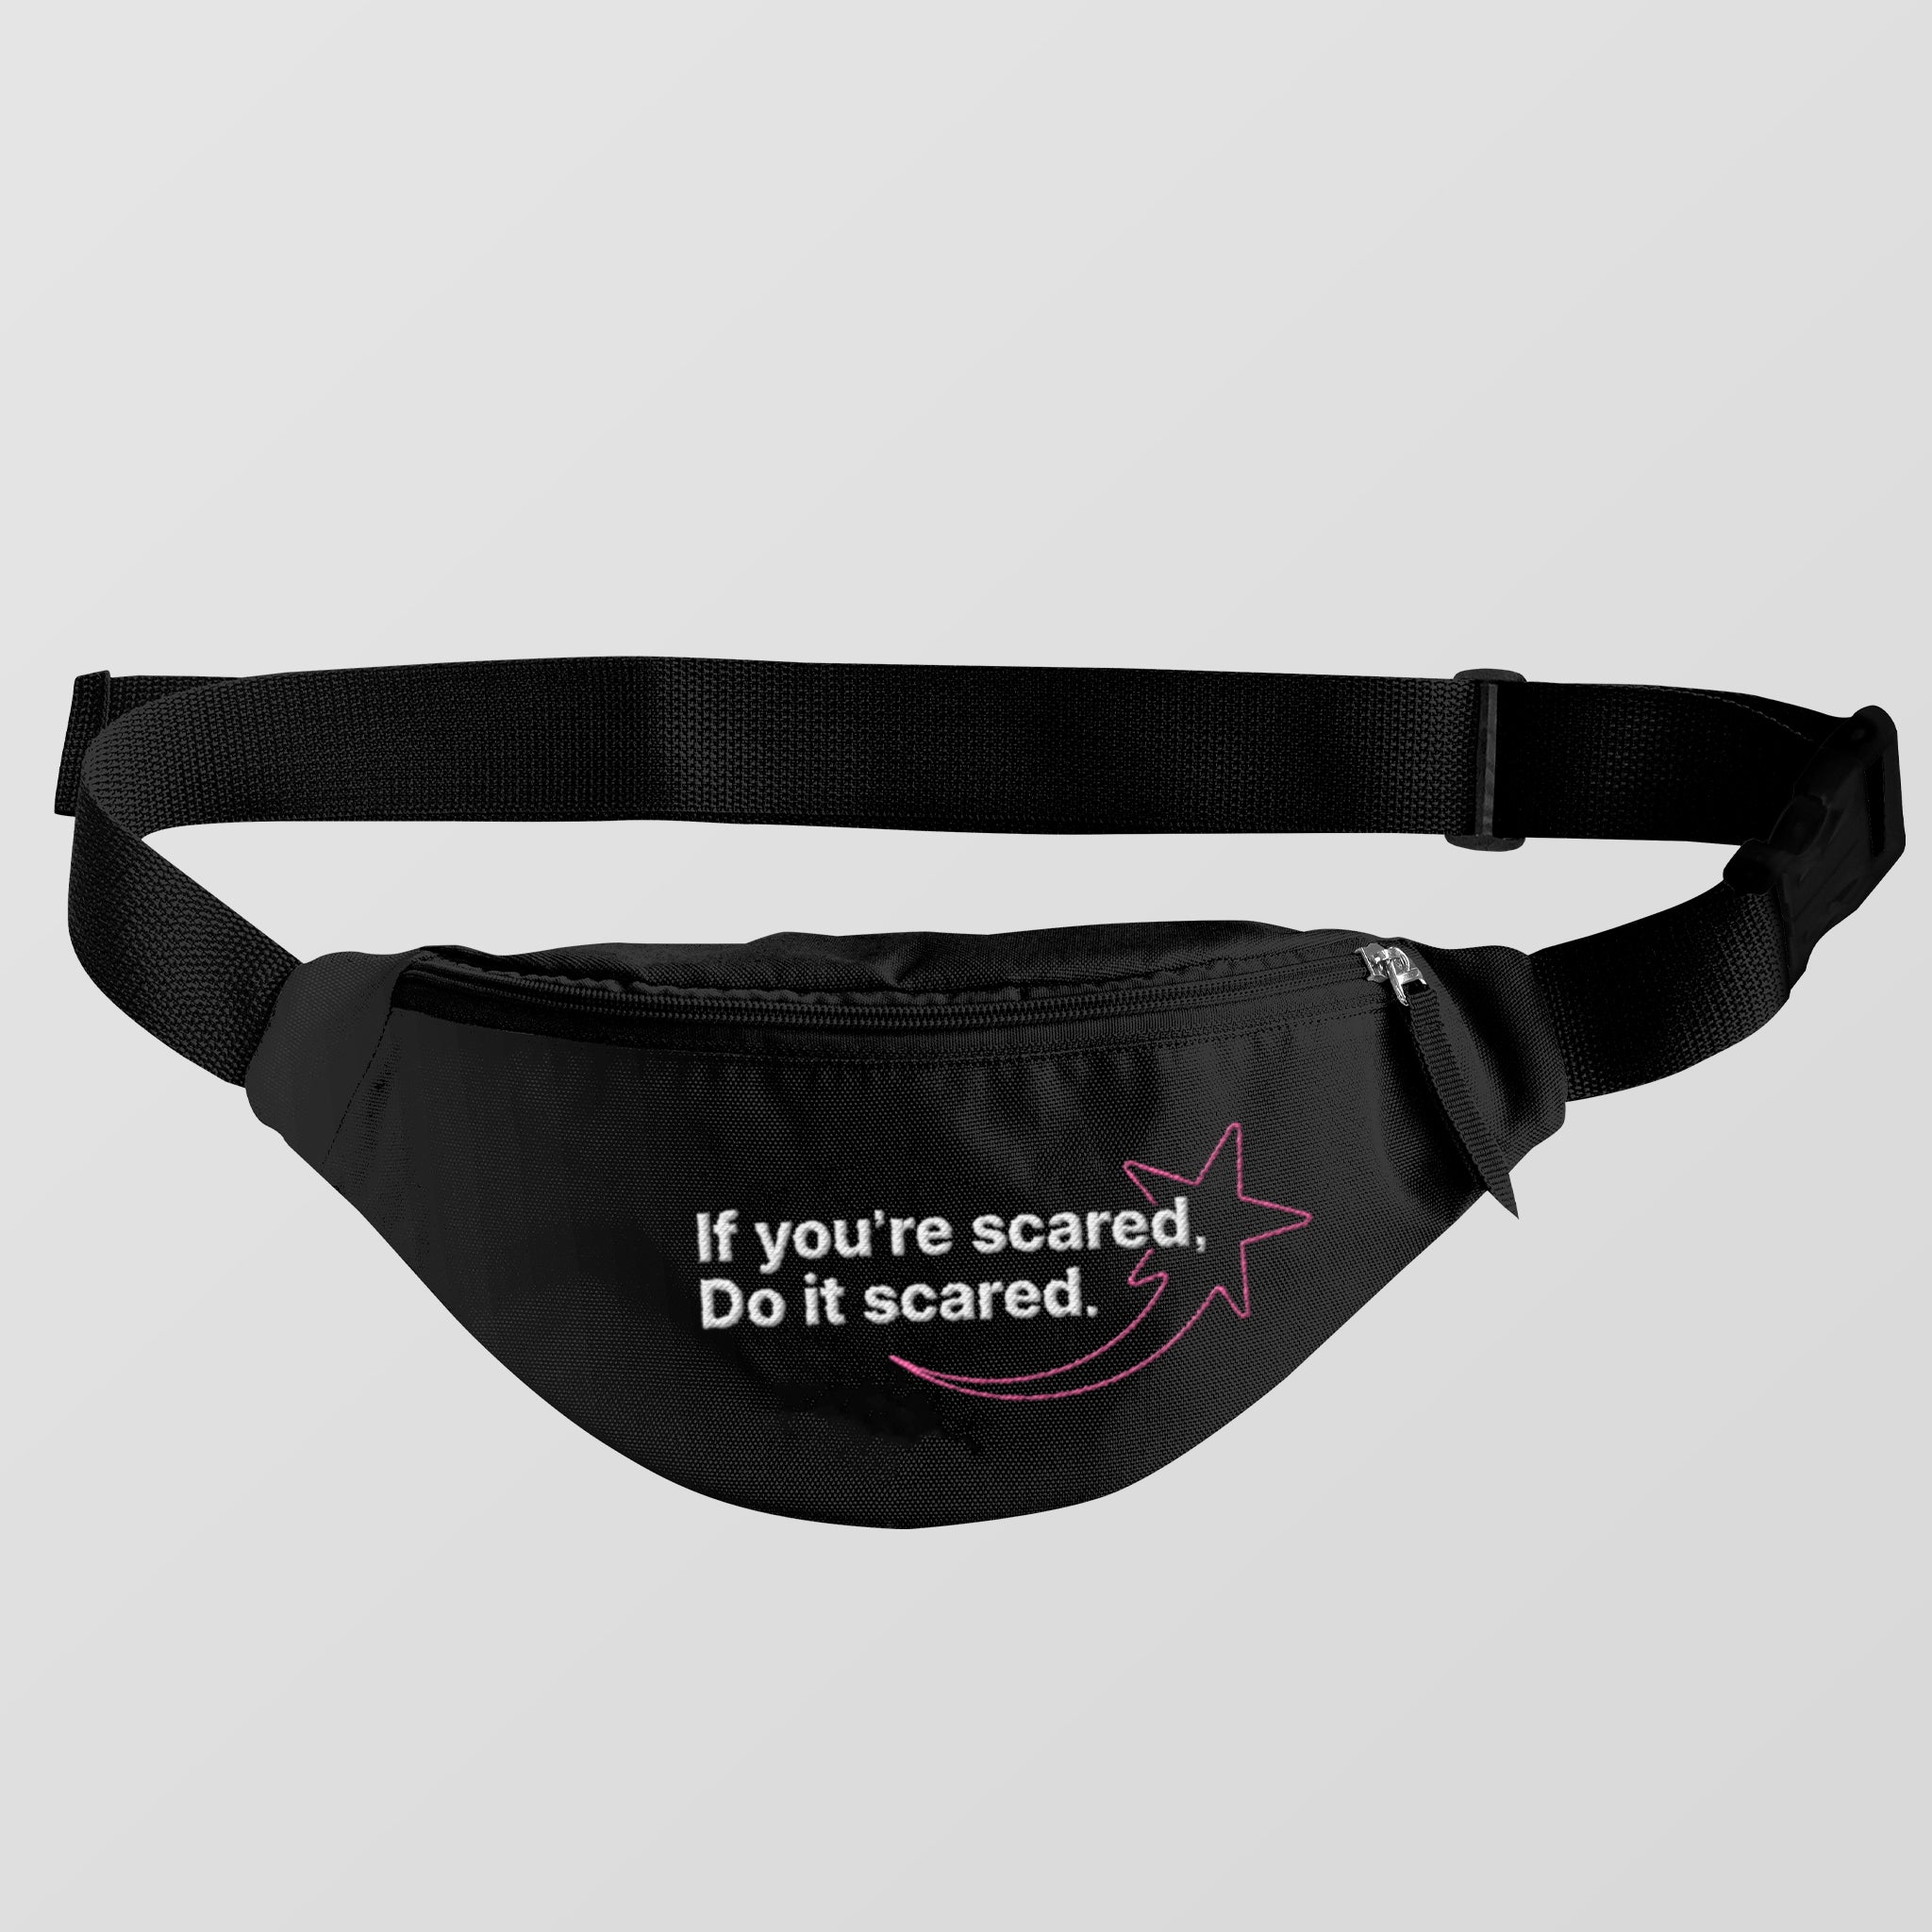 Waist bag 'If you're Scared'